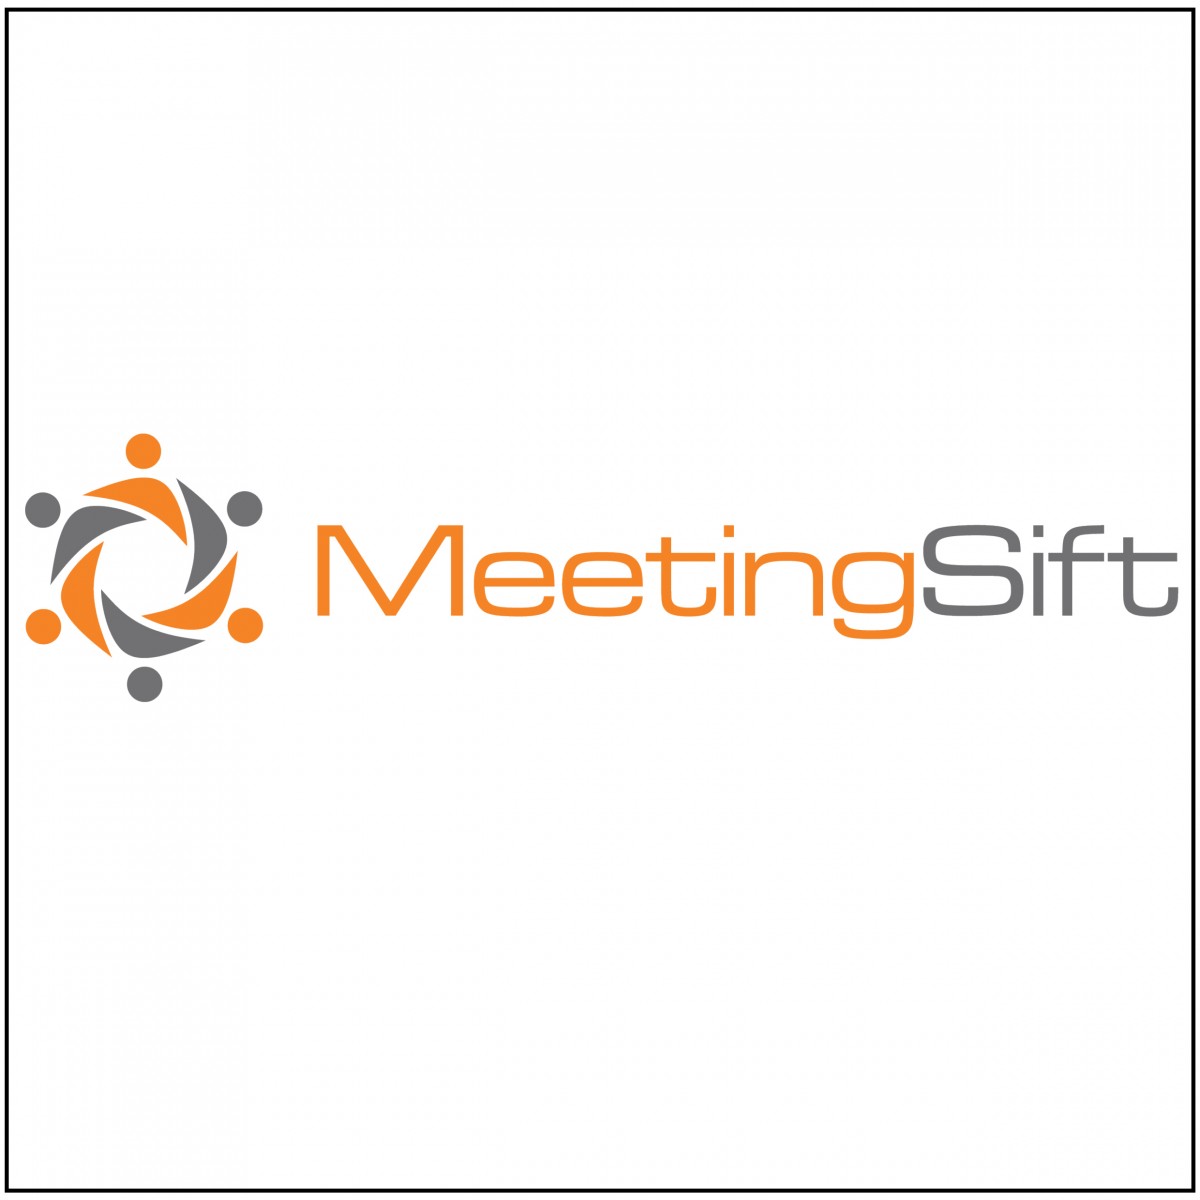 Meeting Sift